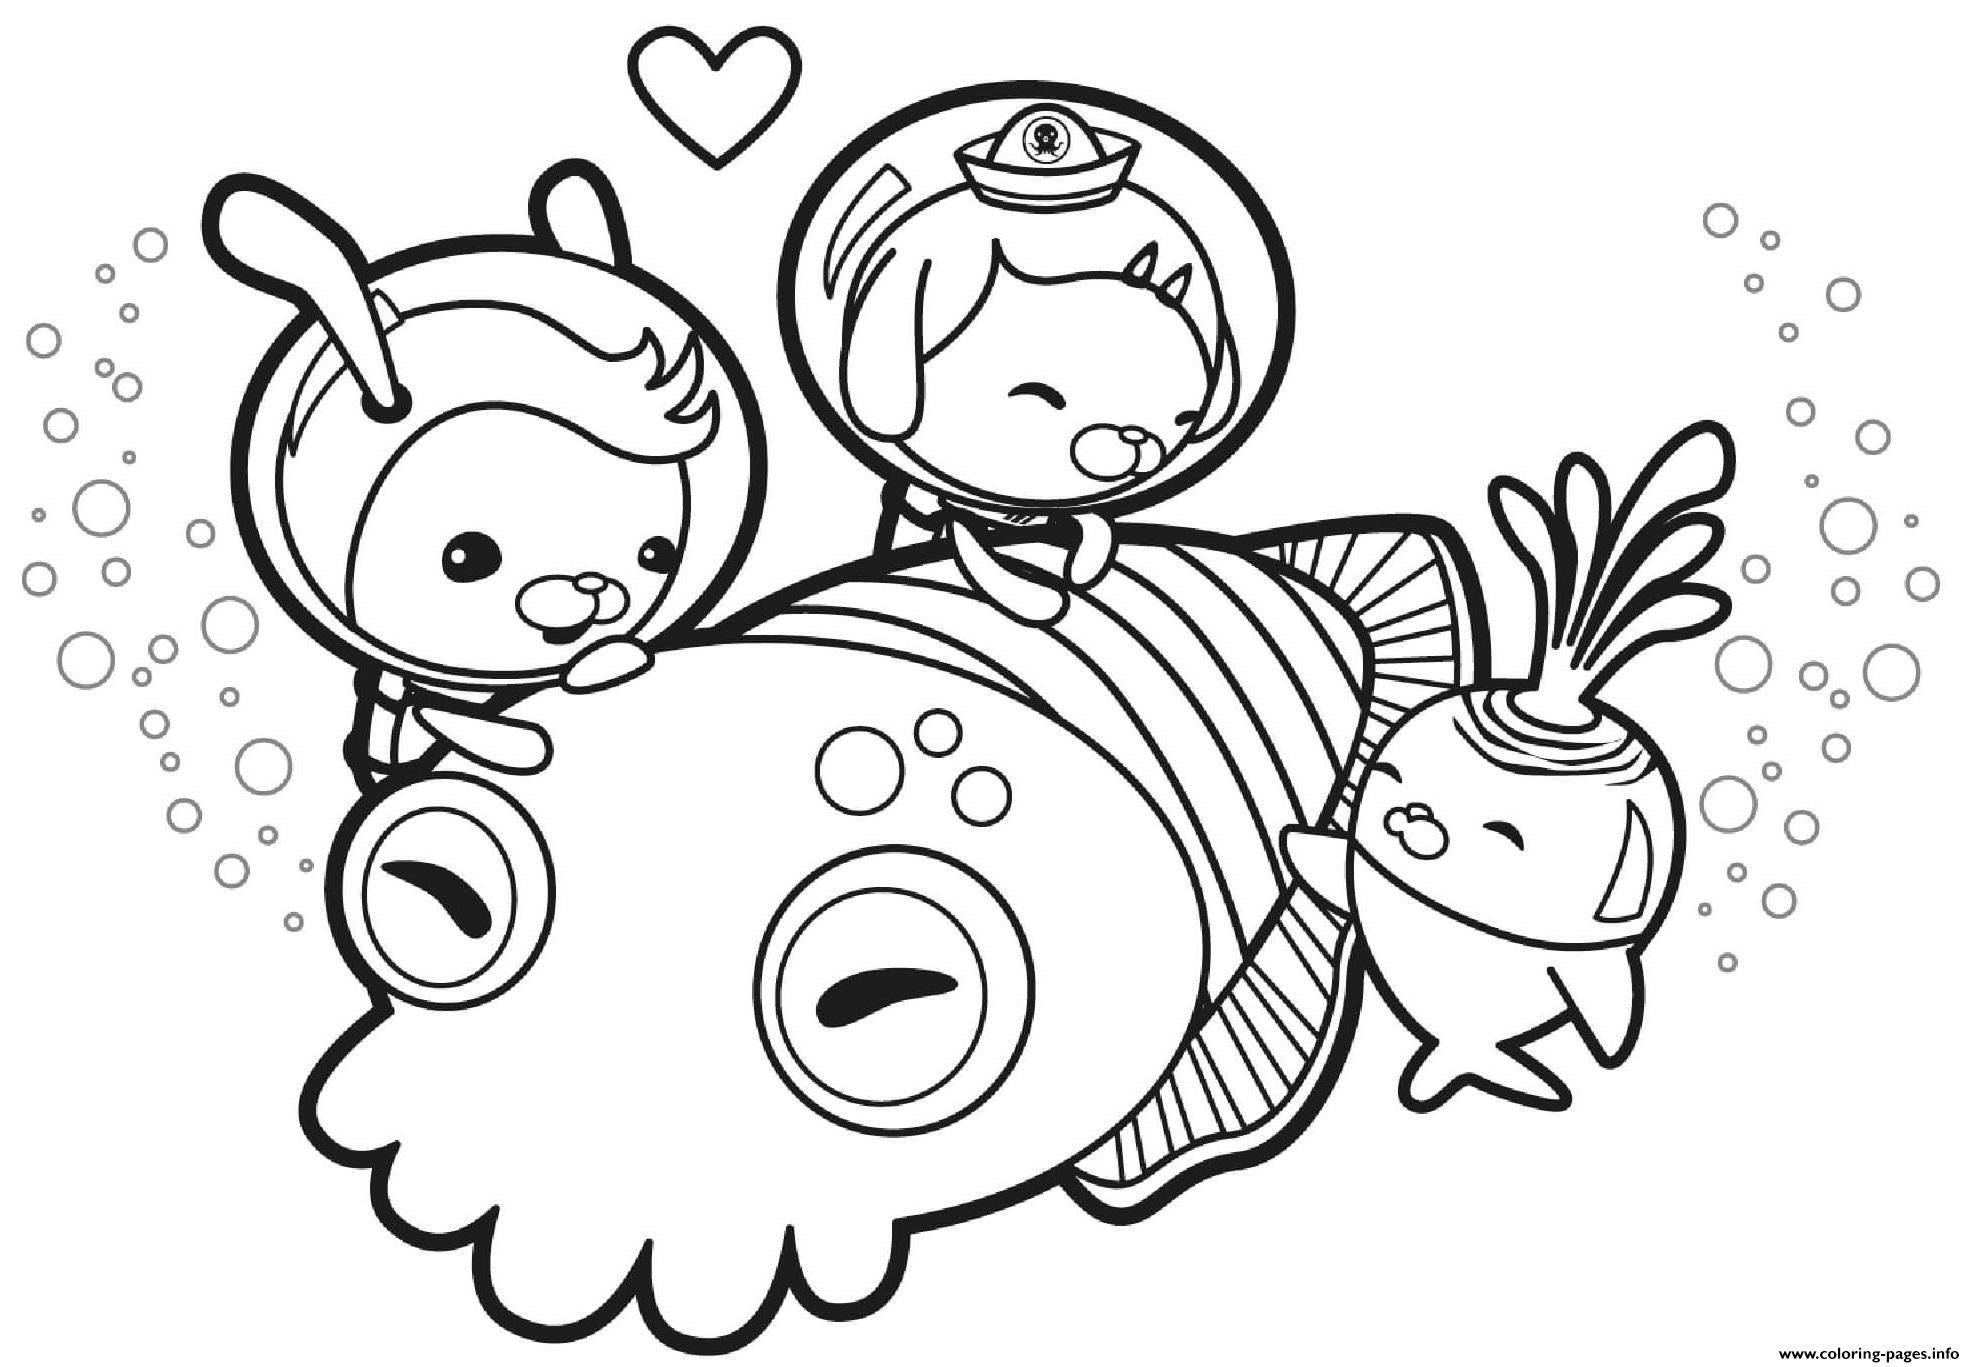 Cuddle With A Cuttlefish Octonauts coloring